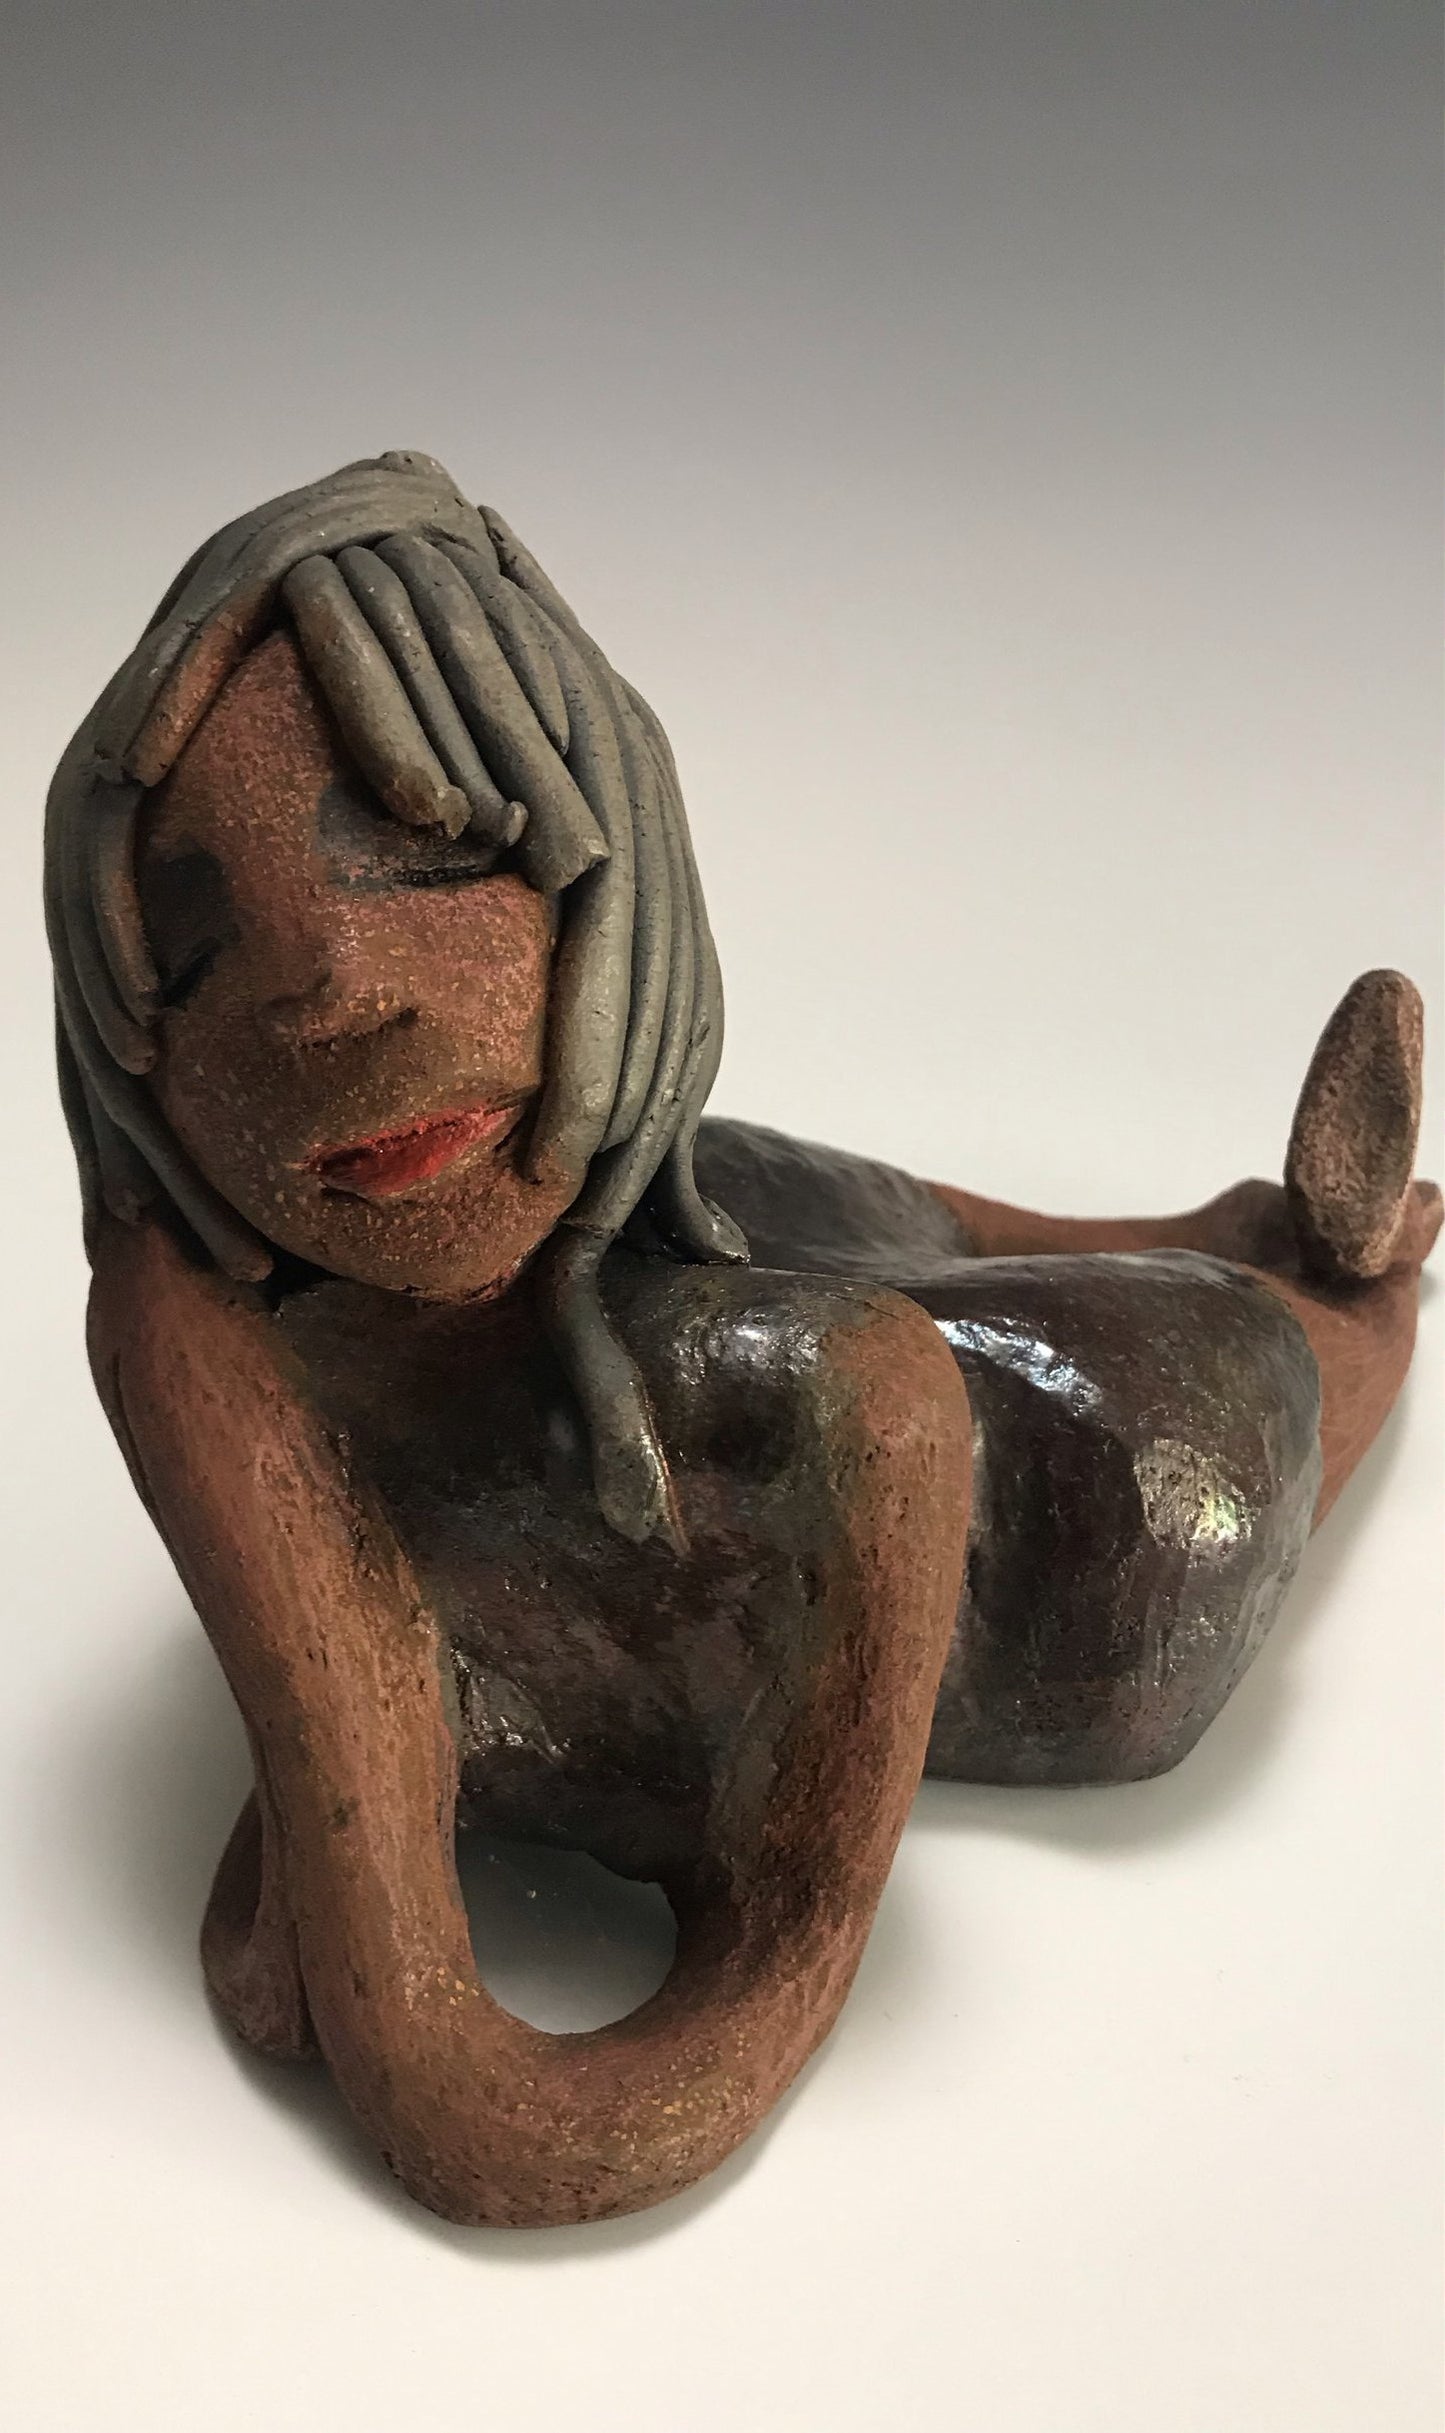      Savannah is 6 "x 4" x 9" and weighs 2.3 lbs.     She has smoky grey hair that's etched in clay.     Savannah has a dark metallic copper dress with hints of alligator green.     Savannah has a lovely copper brown complexion.     Her look says it all     What are you waiting for?  Free Shipping!